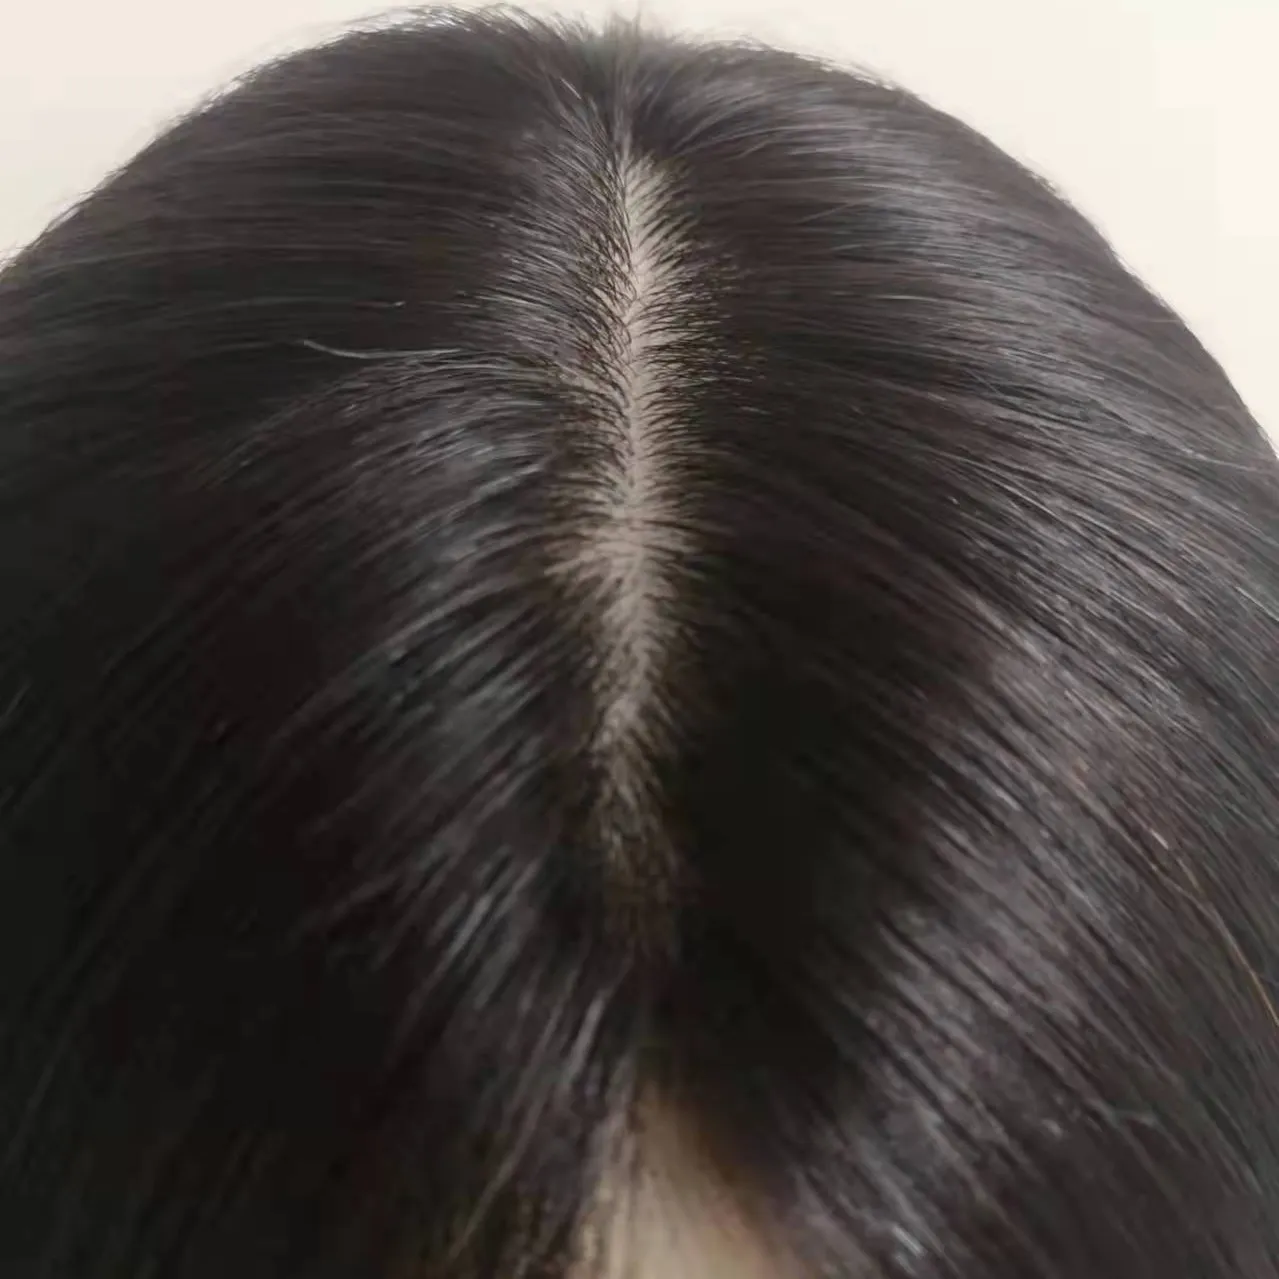 Good price silk top natural human hair piece for hair loss and thinning hair natural black color in stock